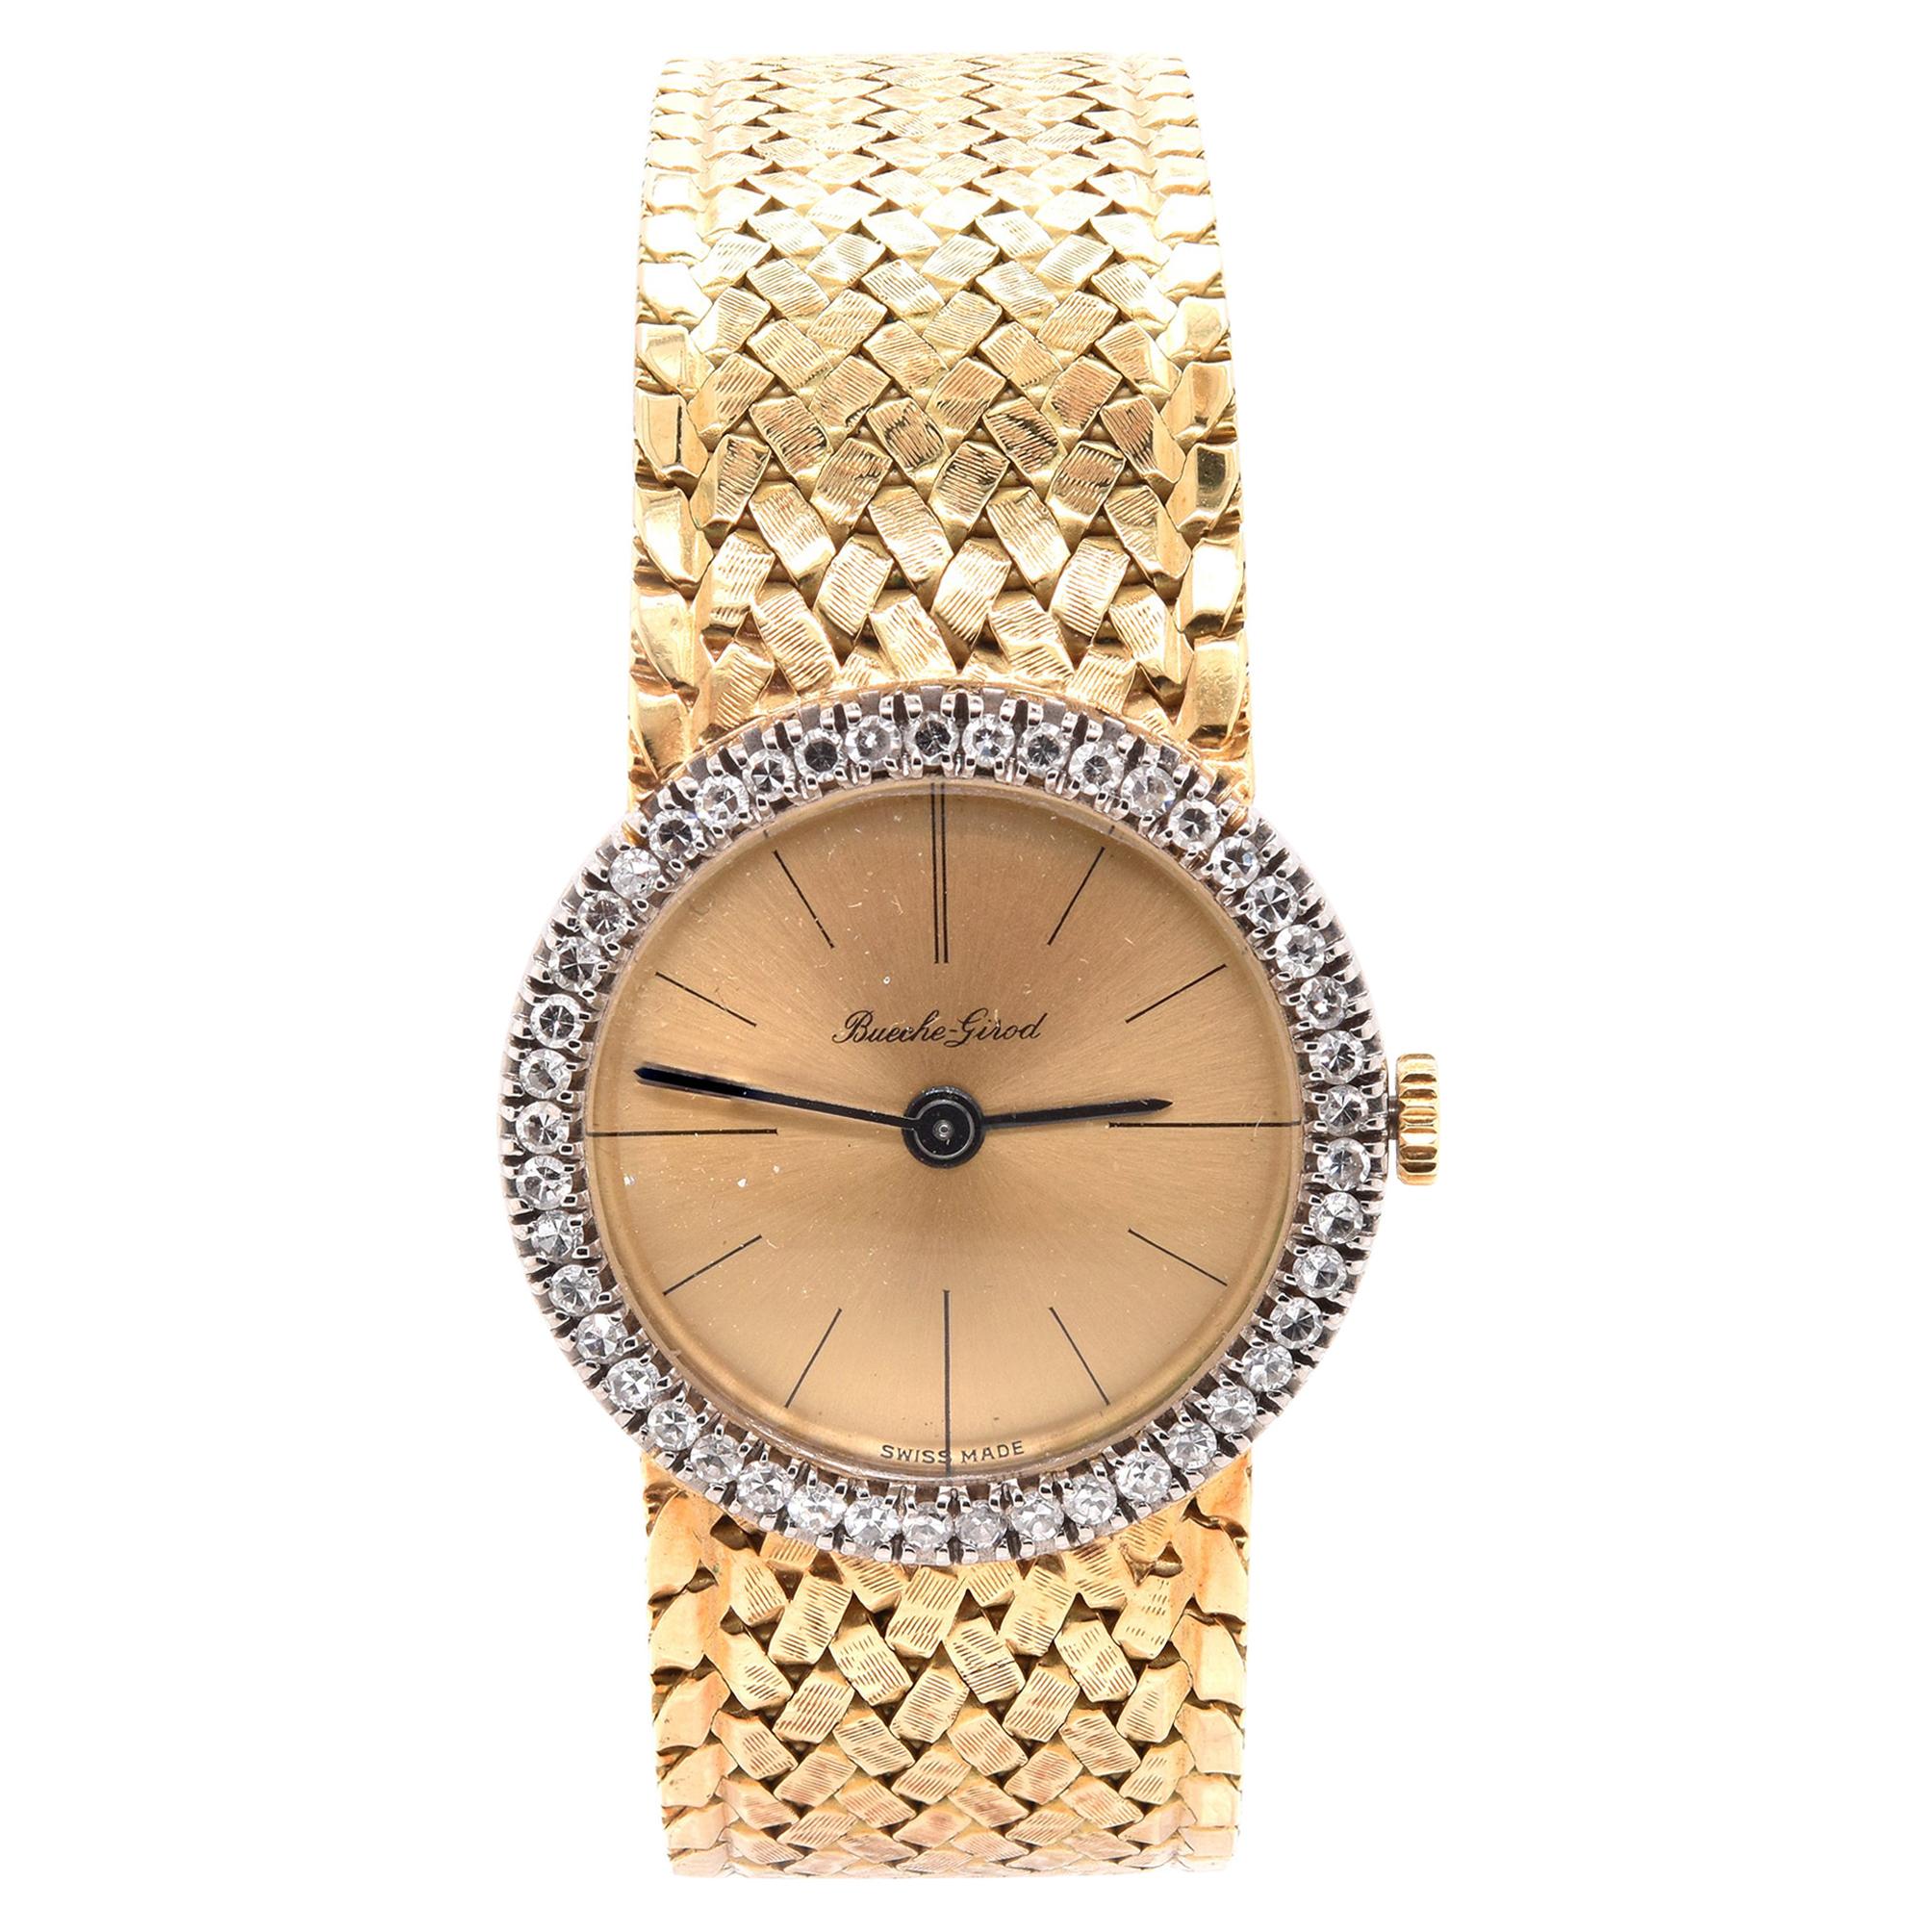 Ladies Gold Watches For Sale | lupon.gov.ph